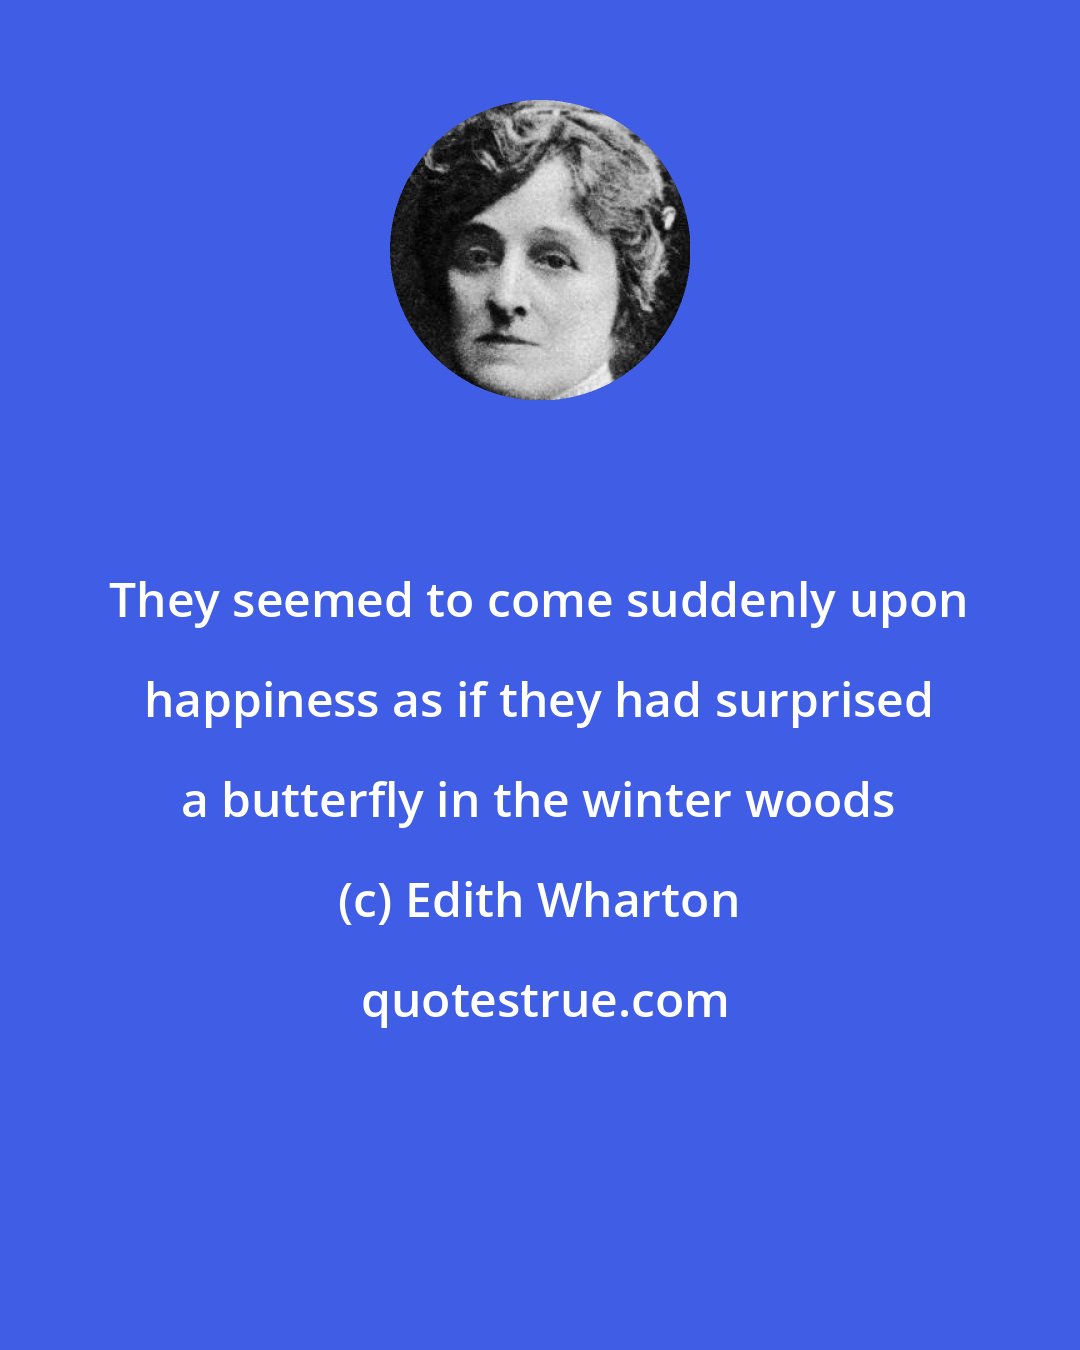 Edith Wharton: They seemed to come suddenly upon happiness as if they had surprised a butterfly in the winter woods